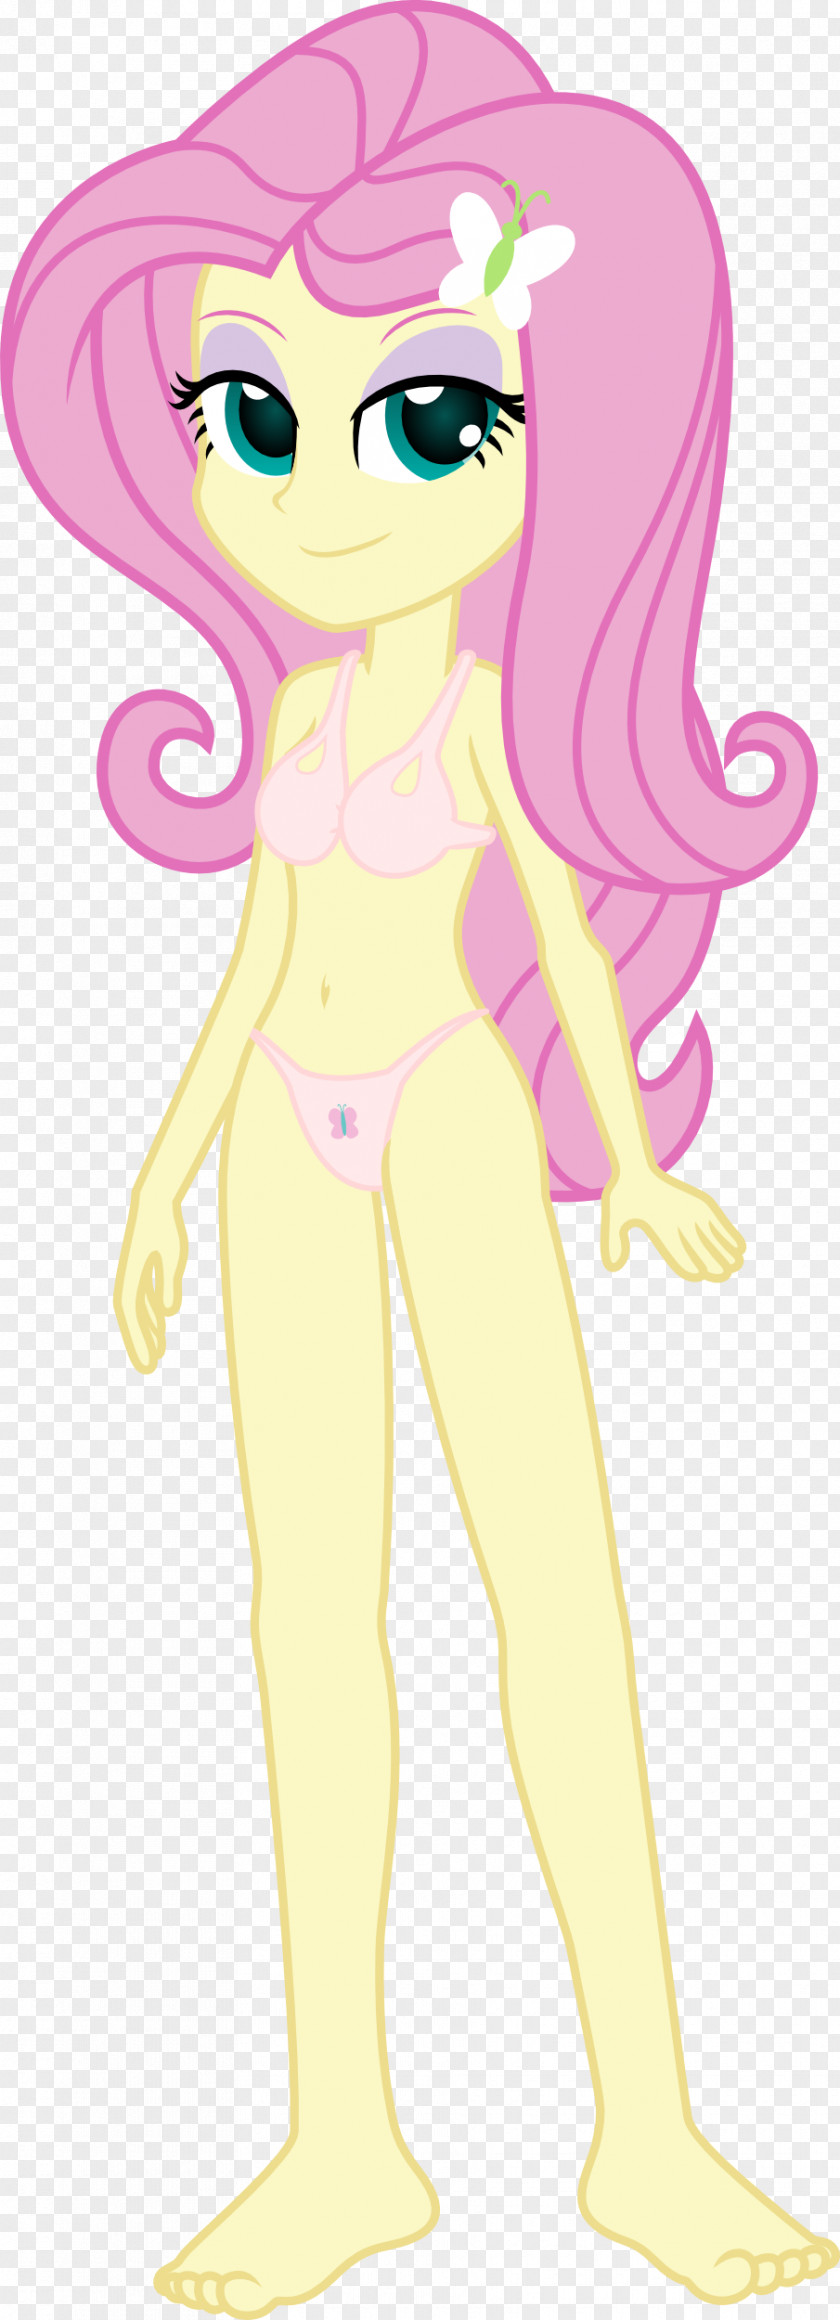 Compare Romeo And Juliet Suicide Fluttershy Pinkie Pie Pony Clothing Rarity PNG